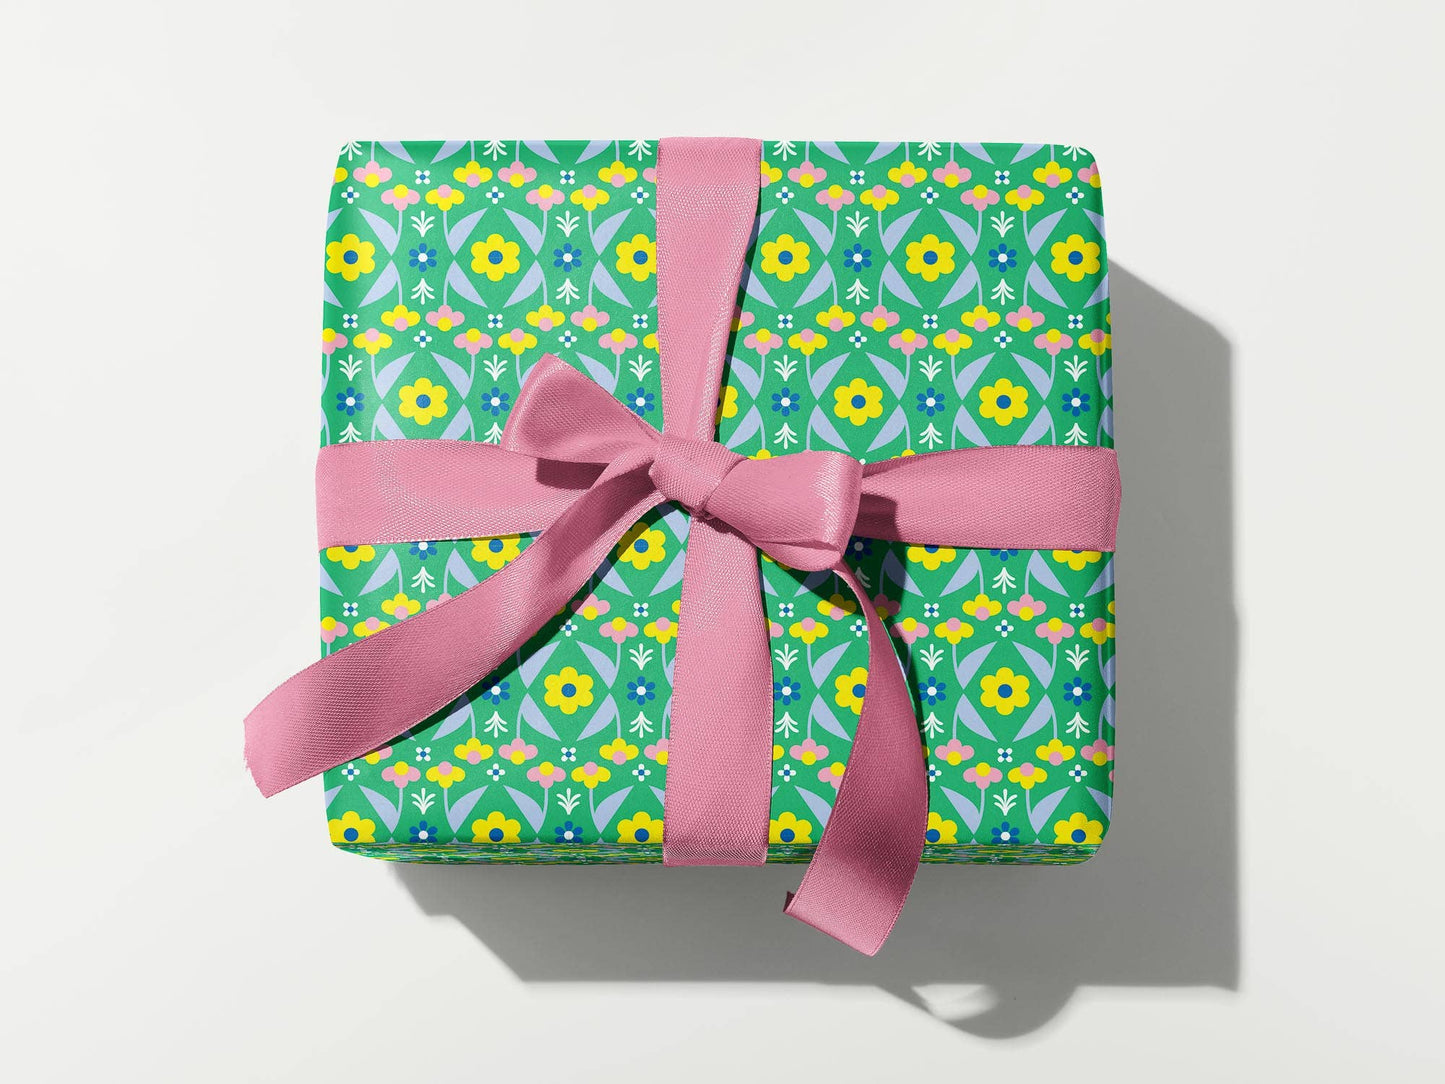 Scandi-dance Floral Gift Wrap Sheets or Roll